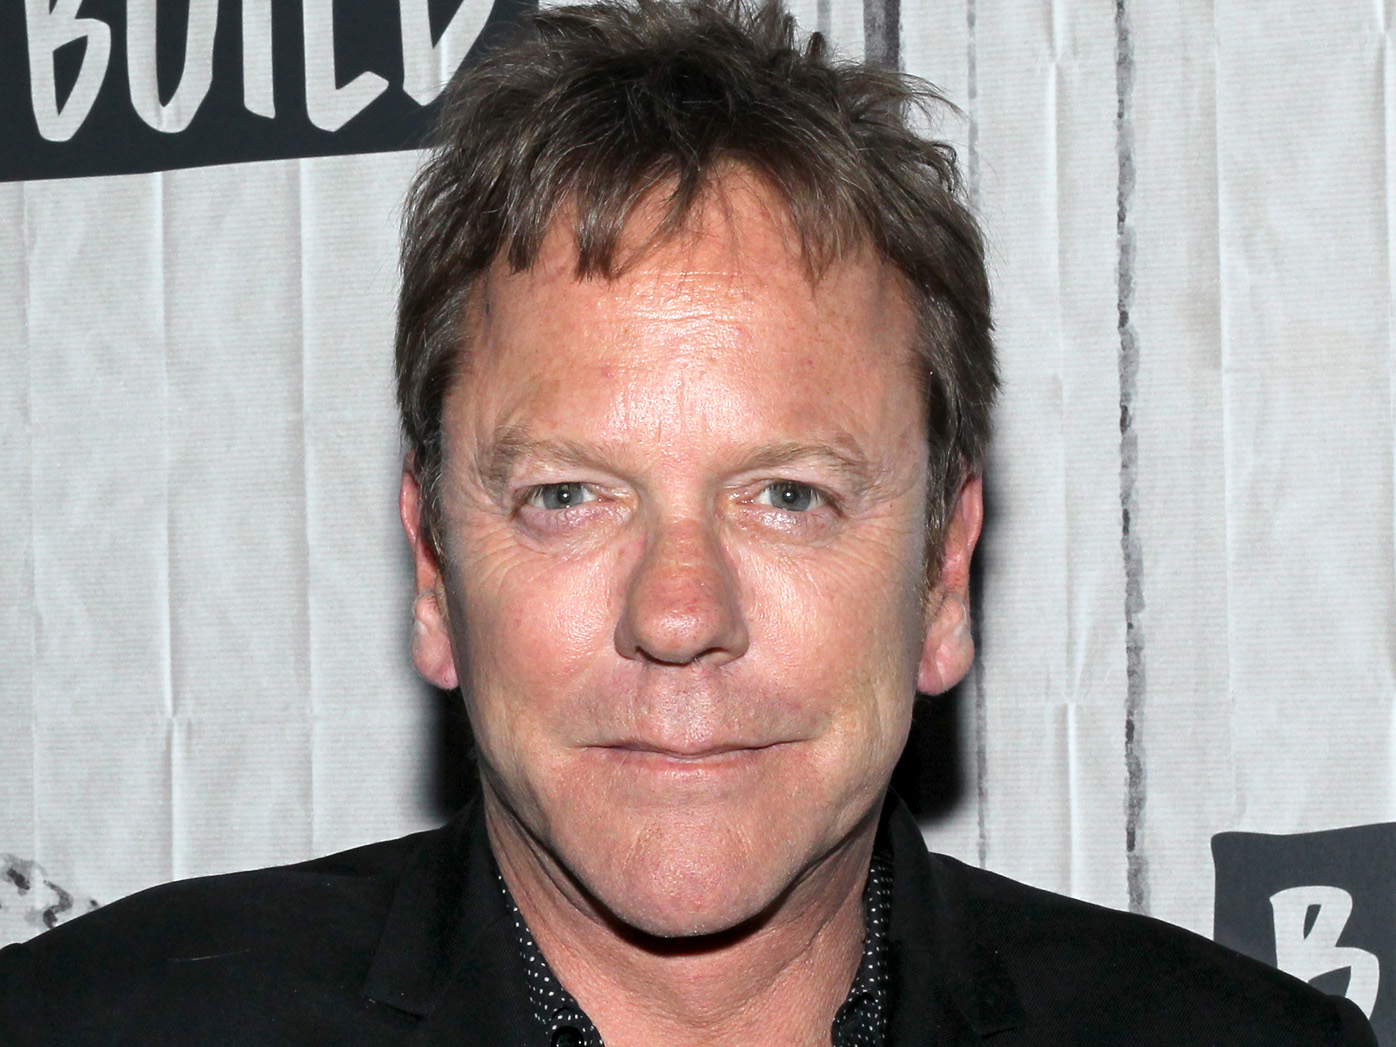 Kiefer Sutherland cancels remainder of tour after falling on the steps of his tour bus